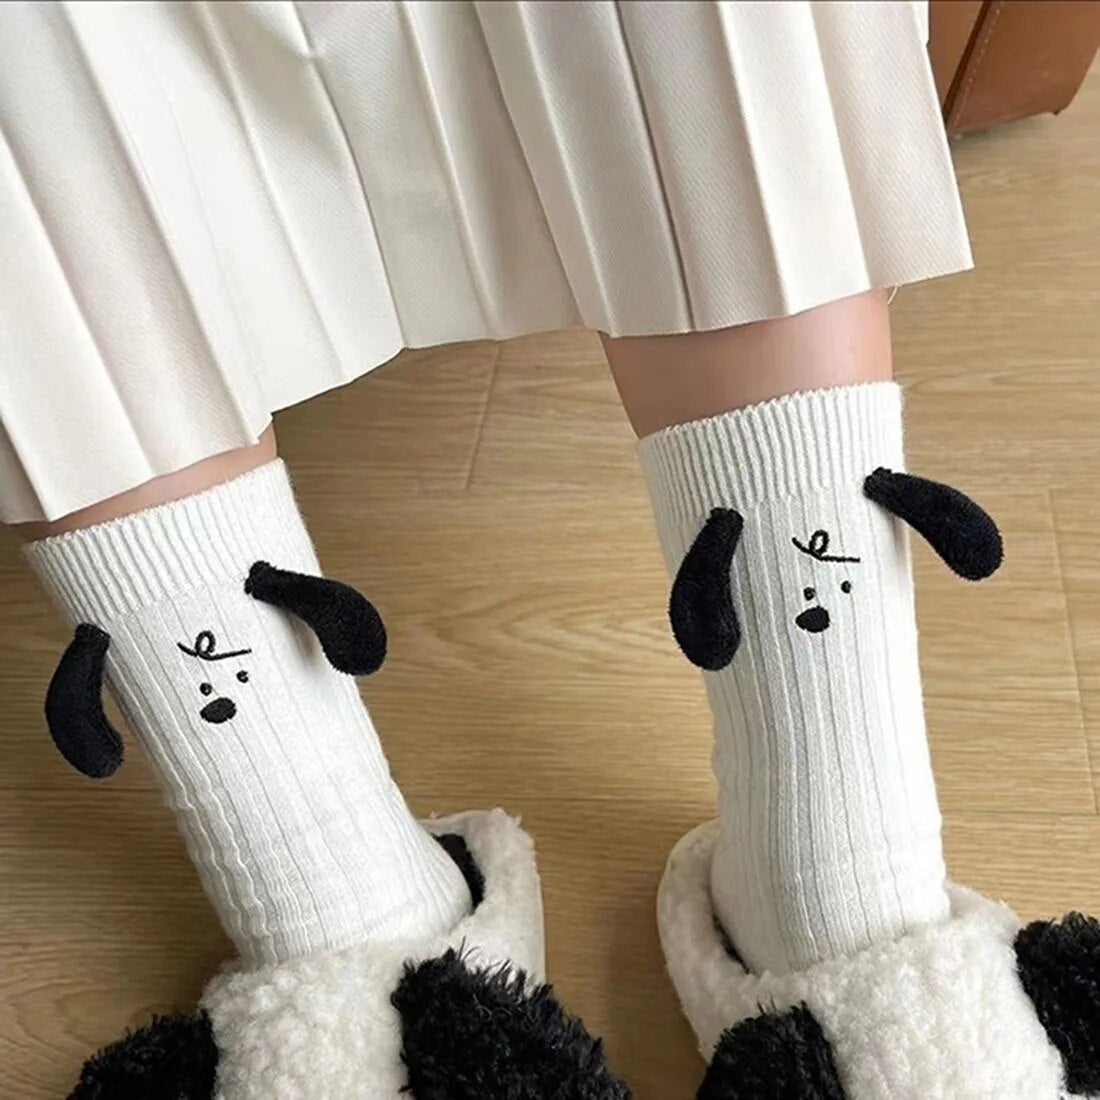 Funny Christmas Magnetic Suction Hand In Hand Socks Black White Unisex Holding Hands Long Girls Harajuku Cute Couple Cotton Sock ShopOnlyDeal